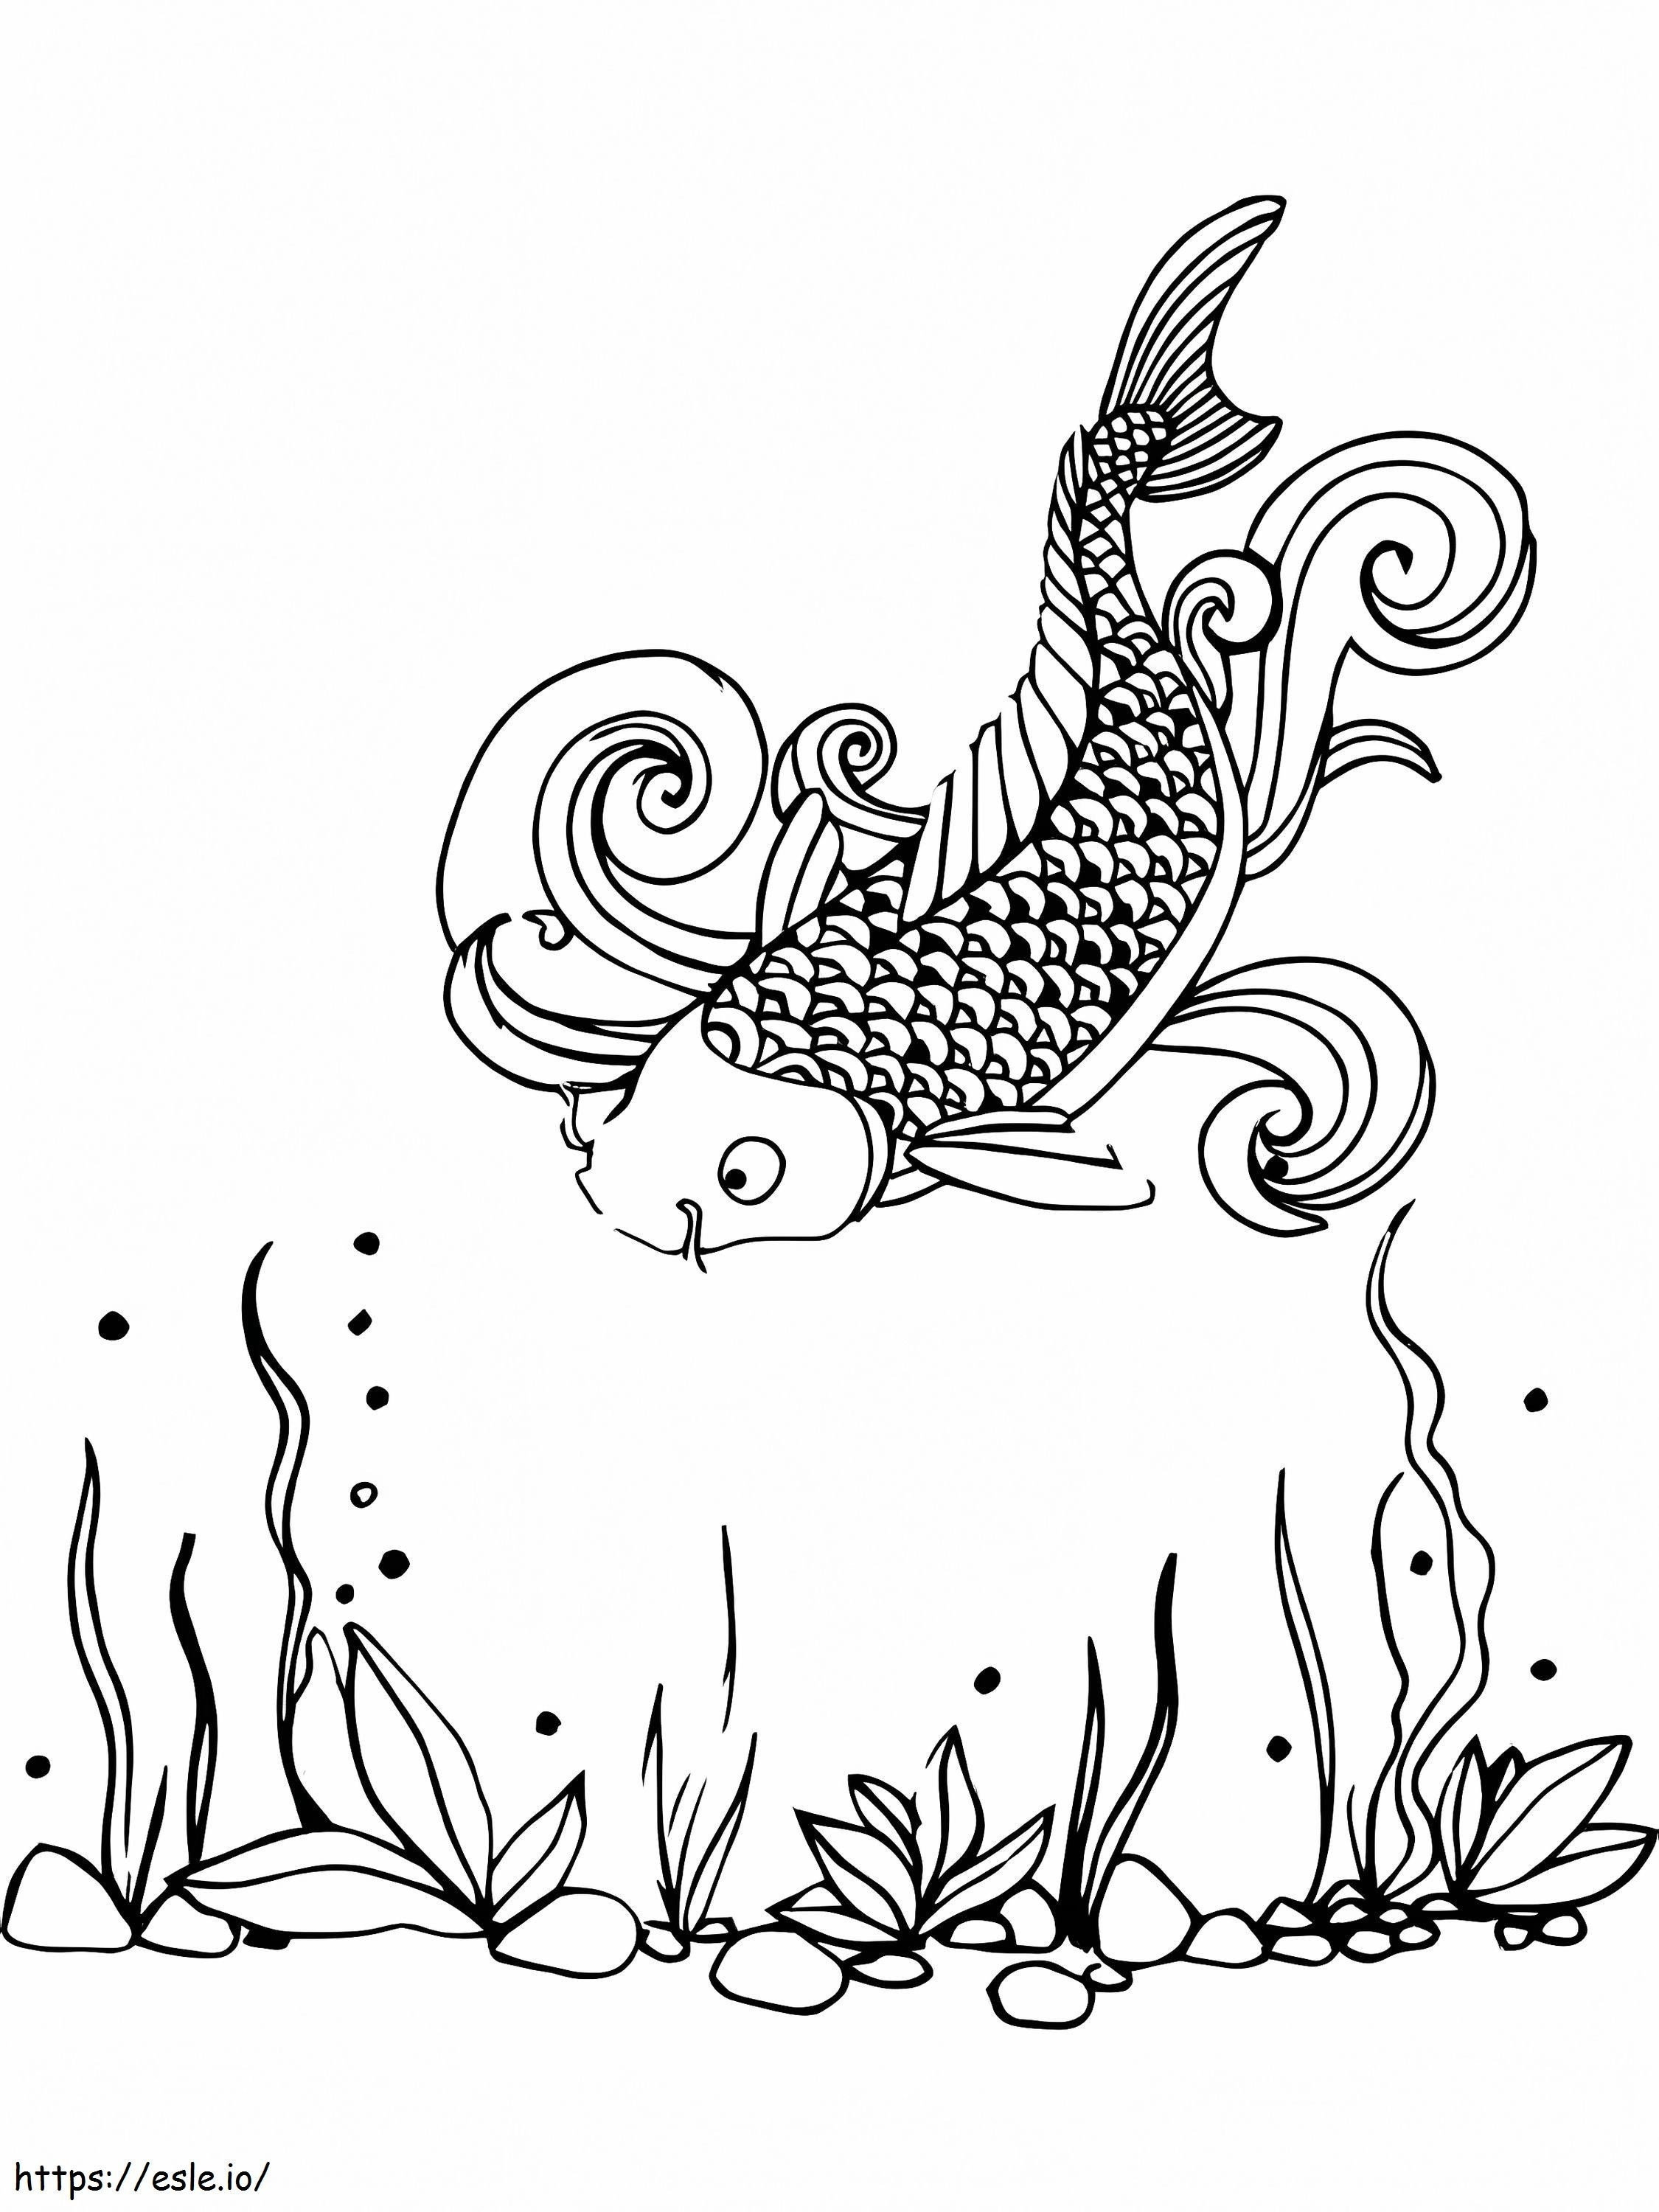 Butterfly Koi Fish coloring page